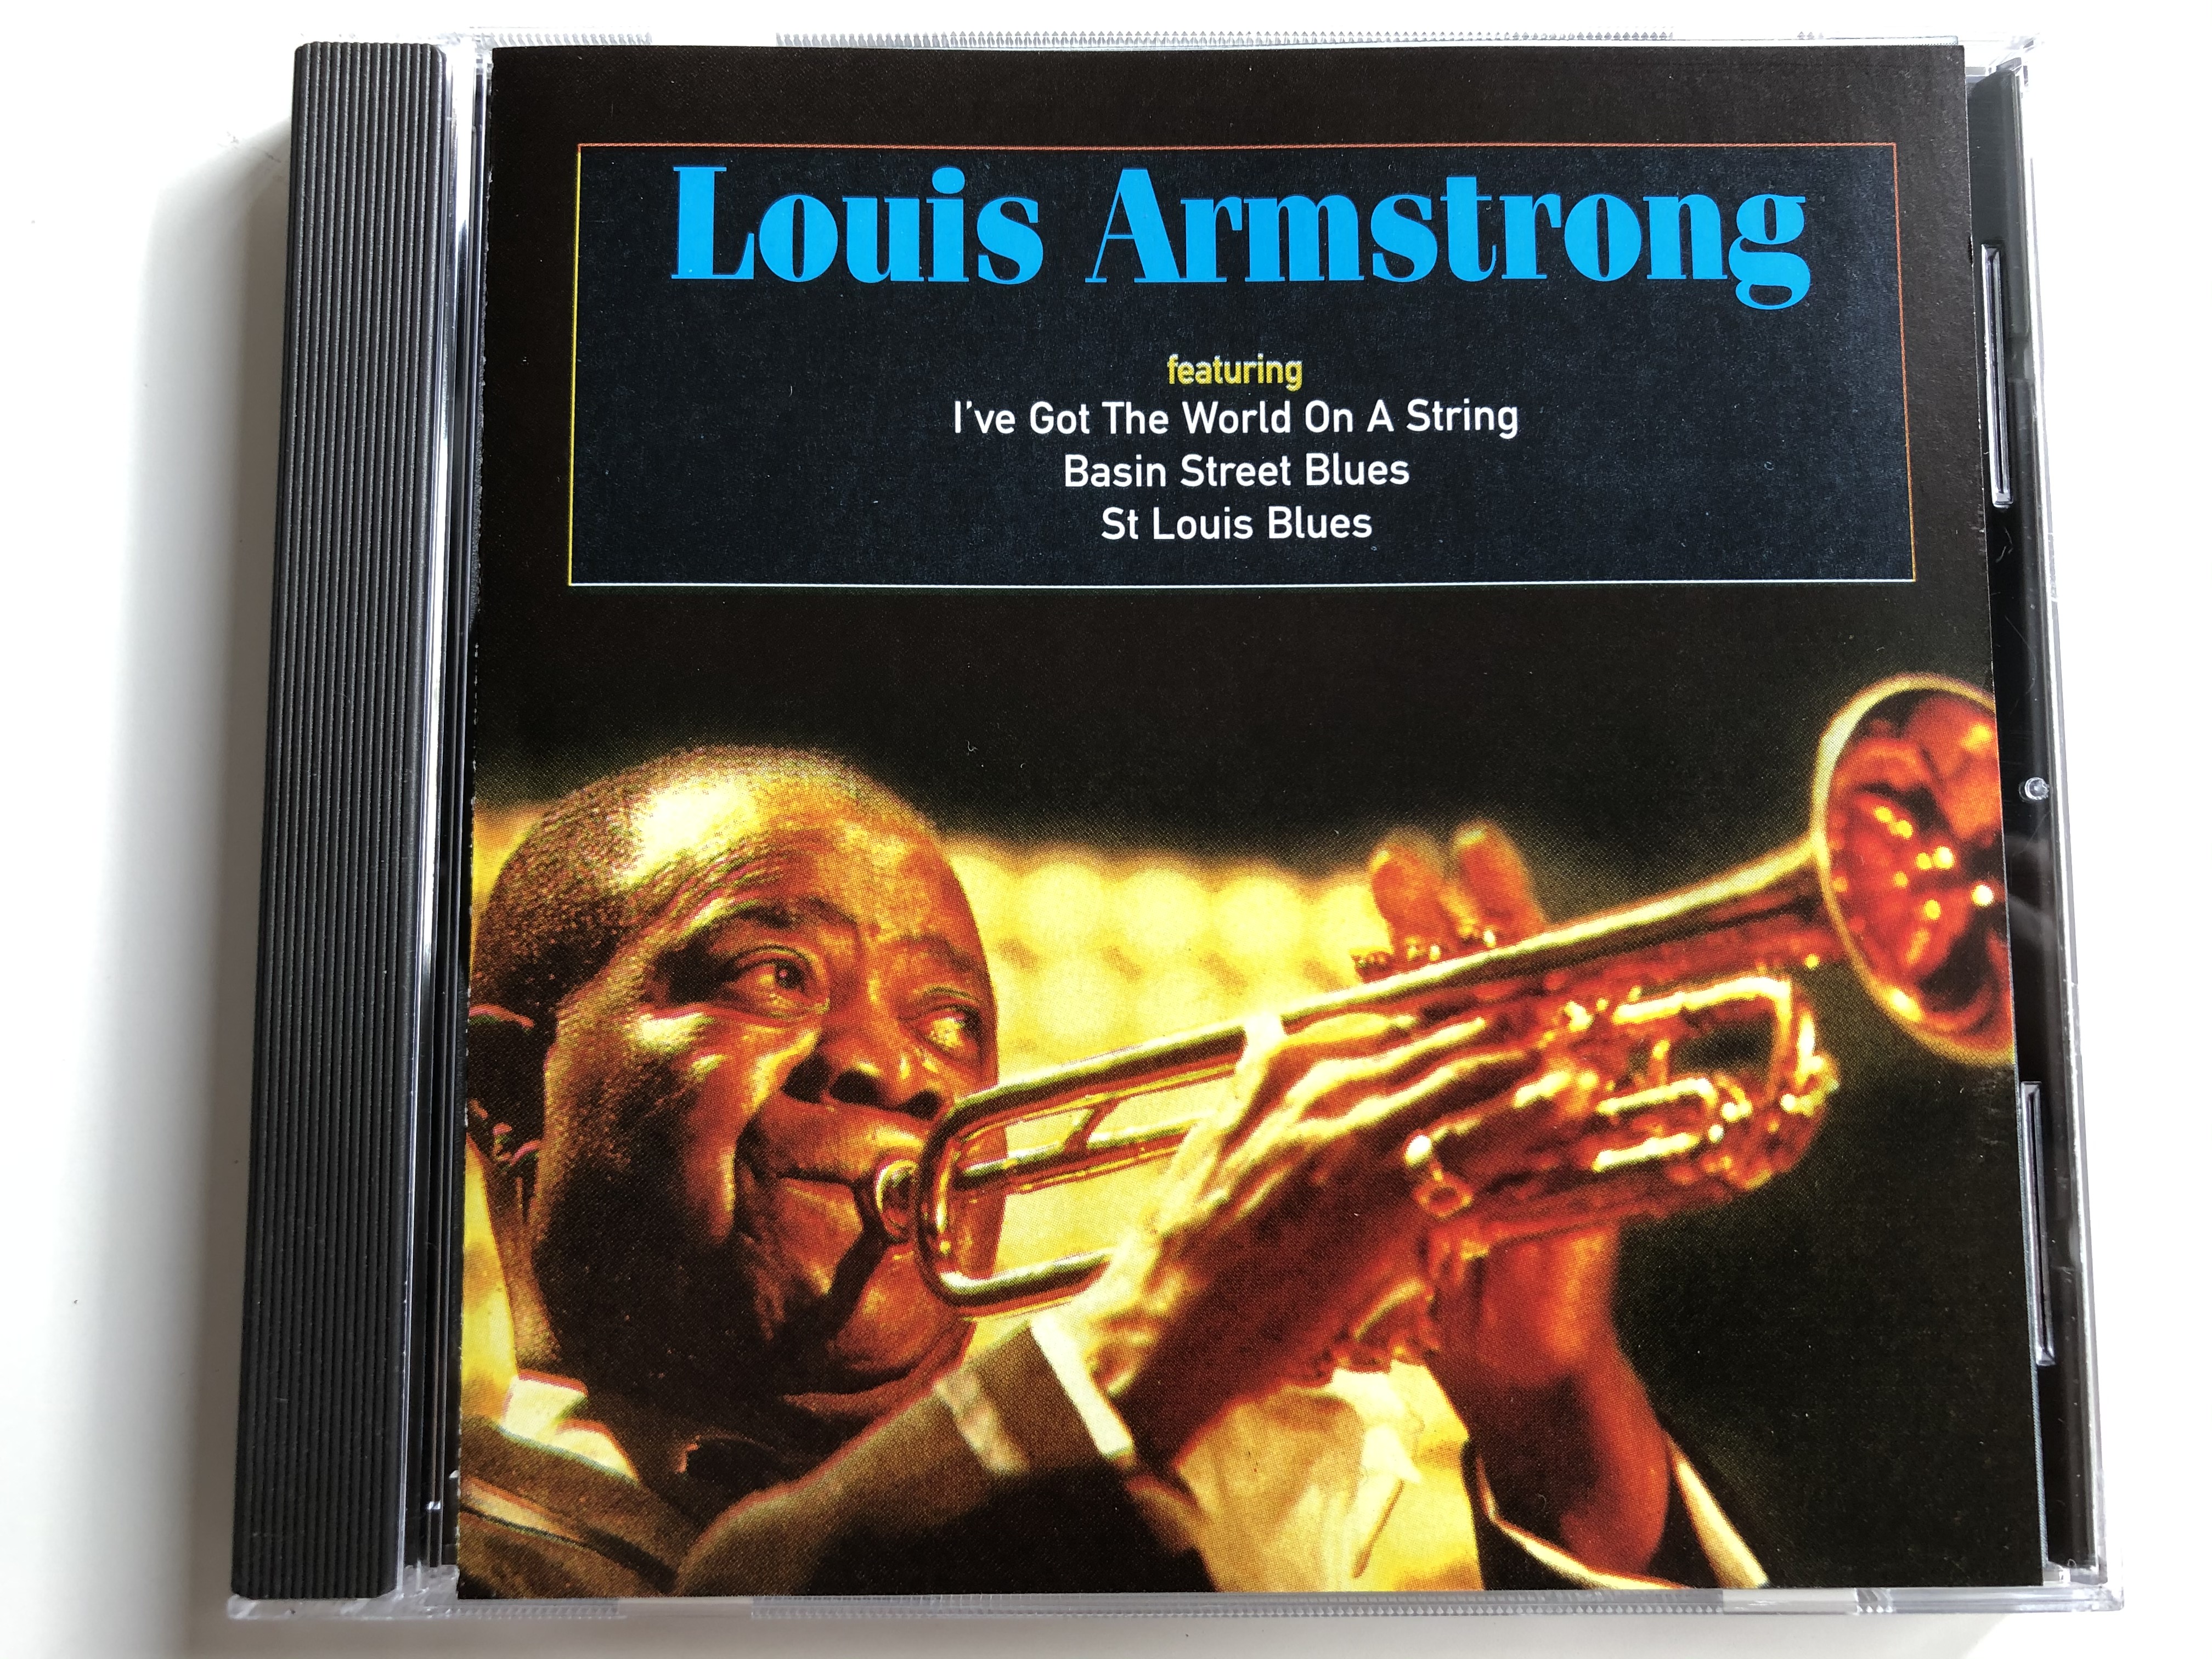 louis-armstrong-featuring-i-ve-got-the-world-on-a-string-basin-street-blues-st-louis-blues-time-music-international-limited-audio-cd-1997-tmi206-1-.jpg